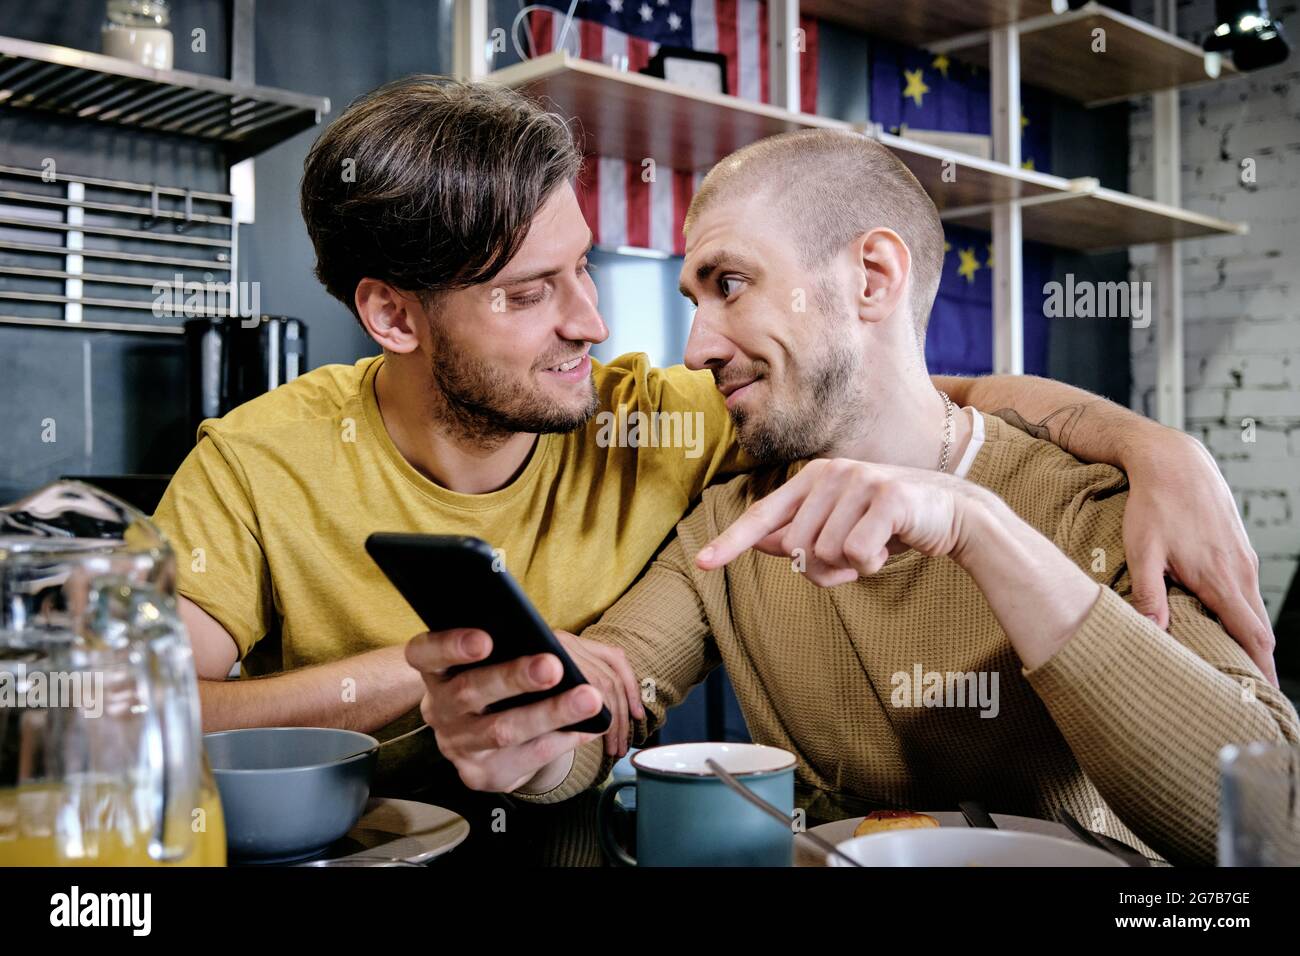 Young gay man embracing his boyfriend when discussing new mobile application or news on social media during breakfast Stock Photo